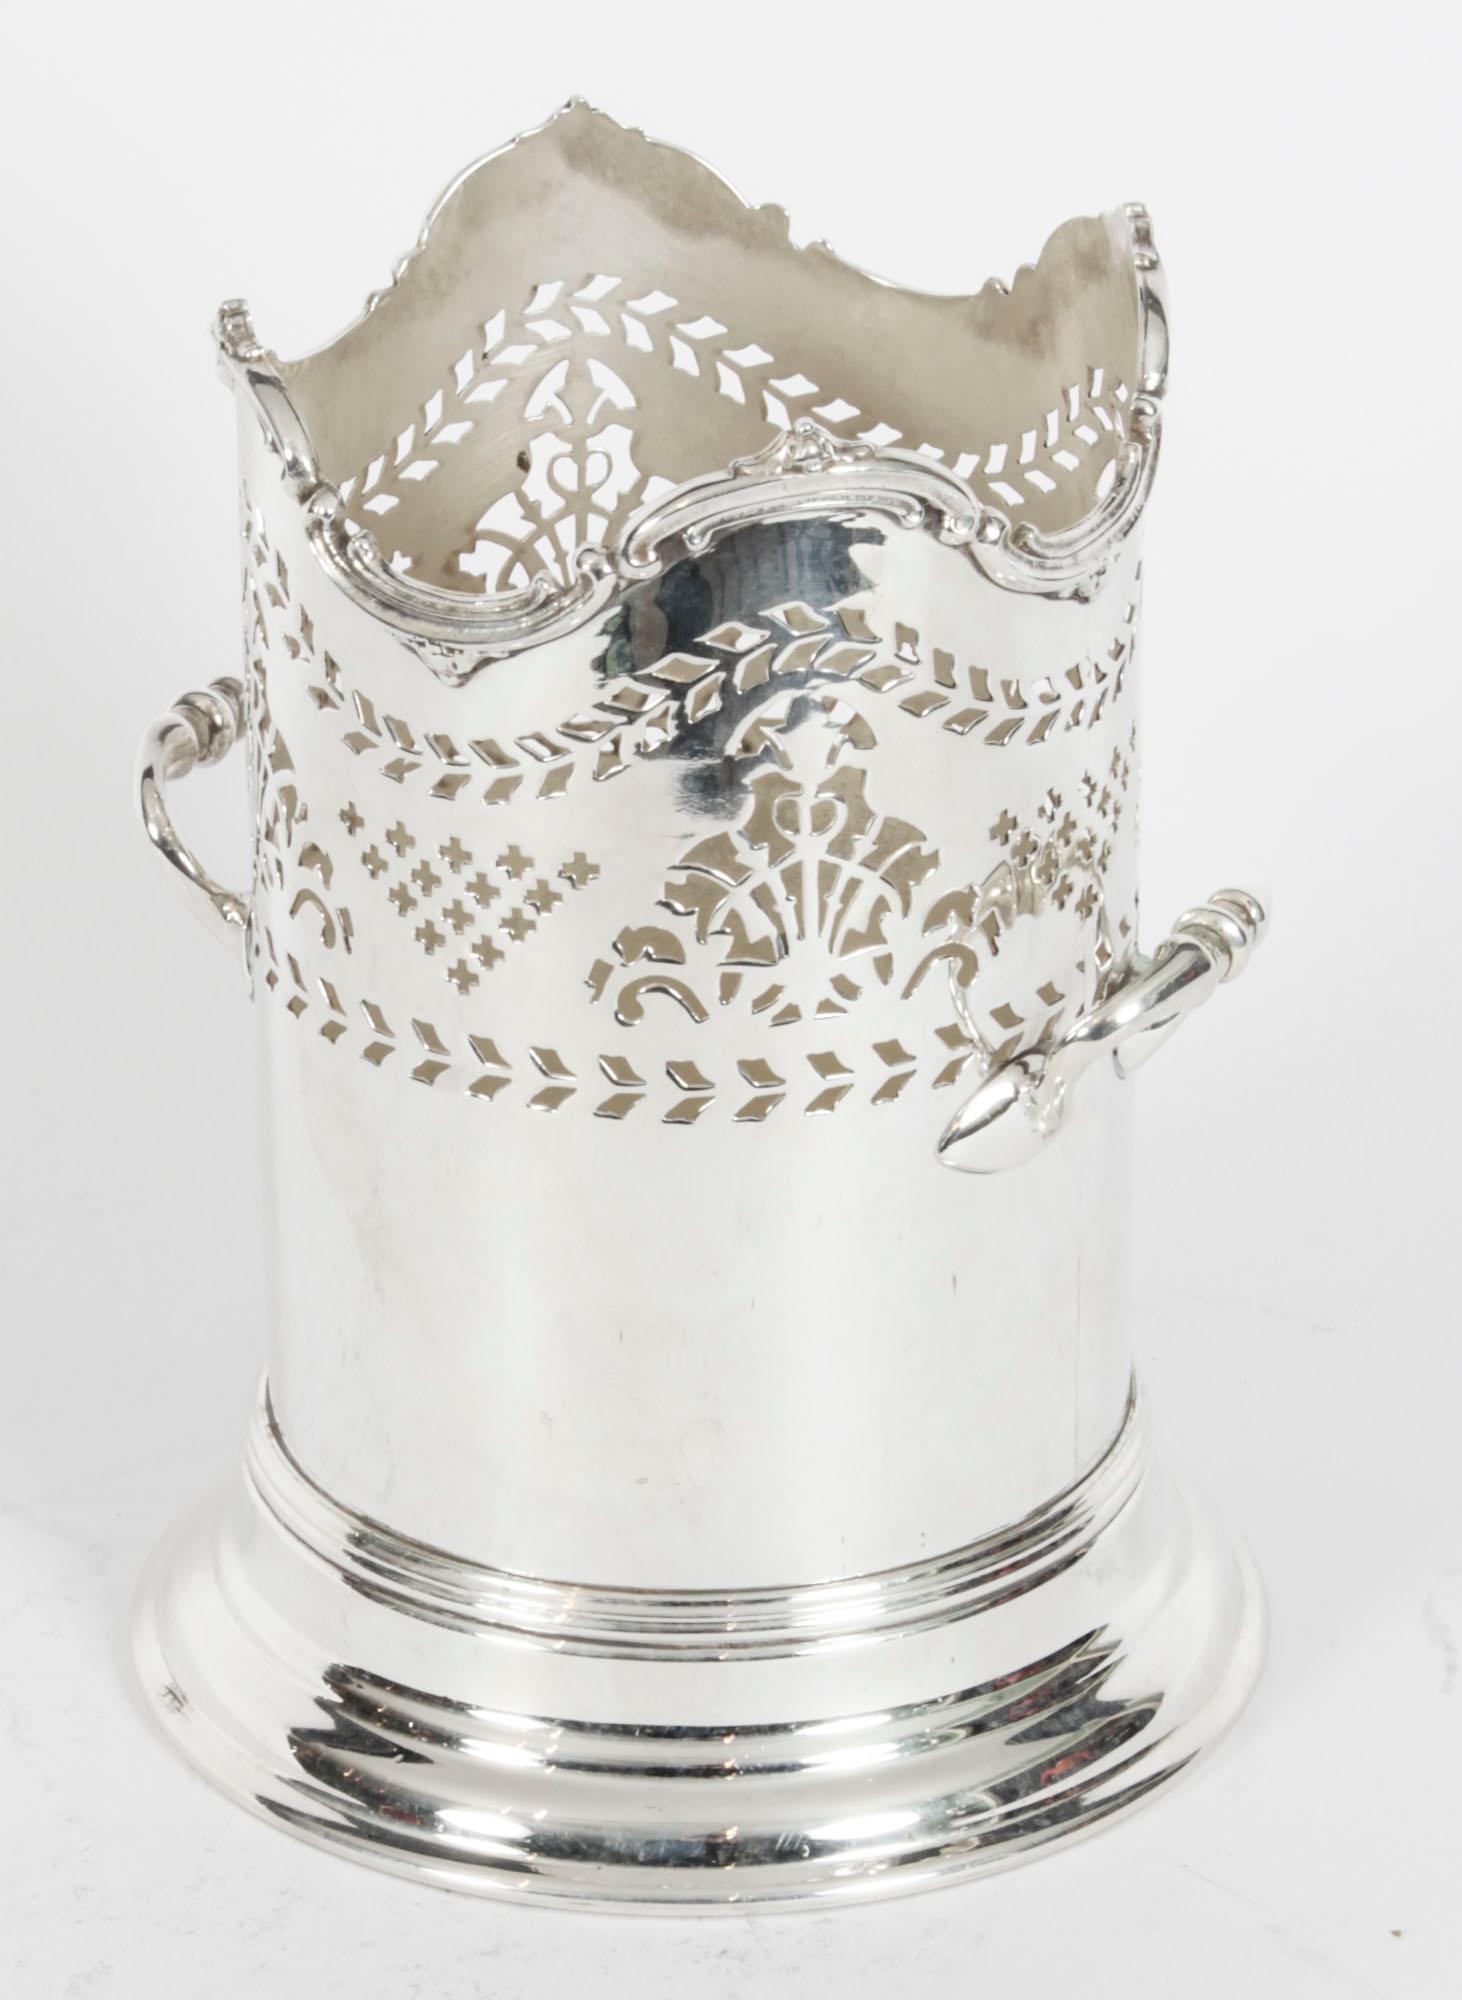 An attractive English antique silver plated bottle holder, circa 1880 and bearing the makers mark Henry Wilkinson Ltd.
 
The attention to detail exhibited by this silversmith is absolutely fantastic, with superb engraved and cut decoration.
